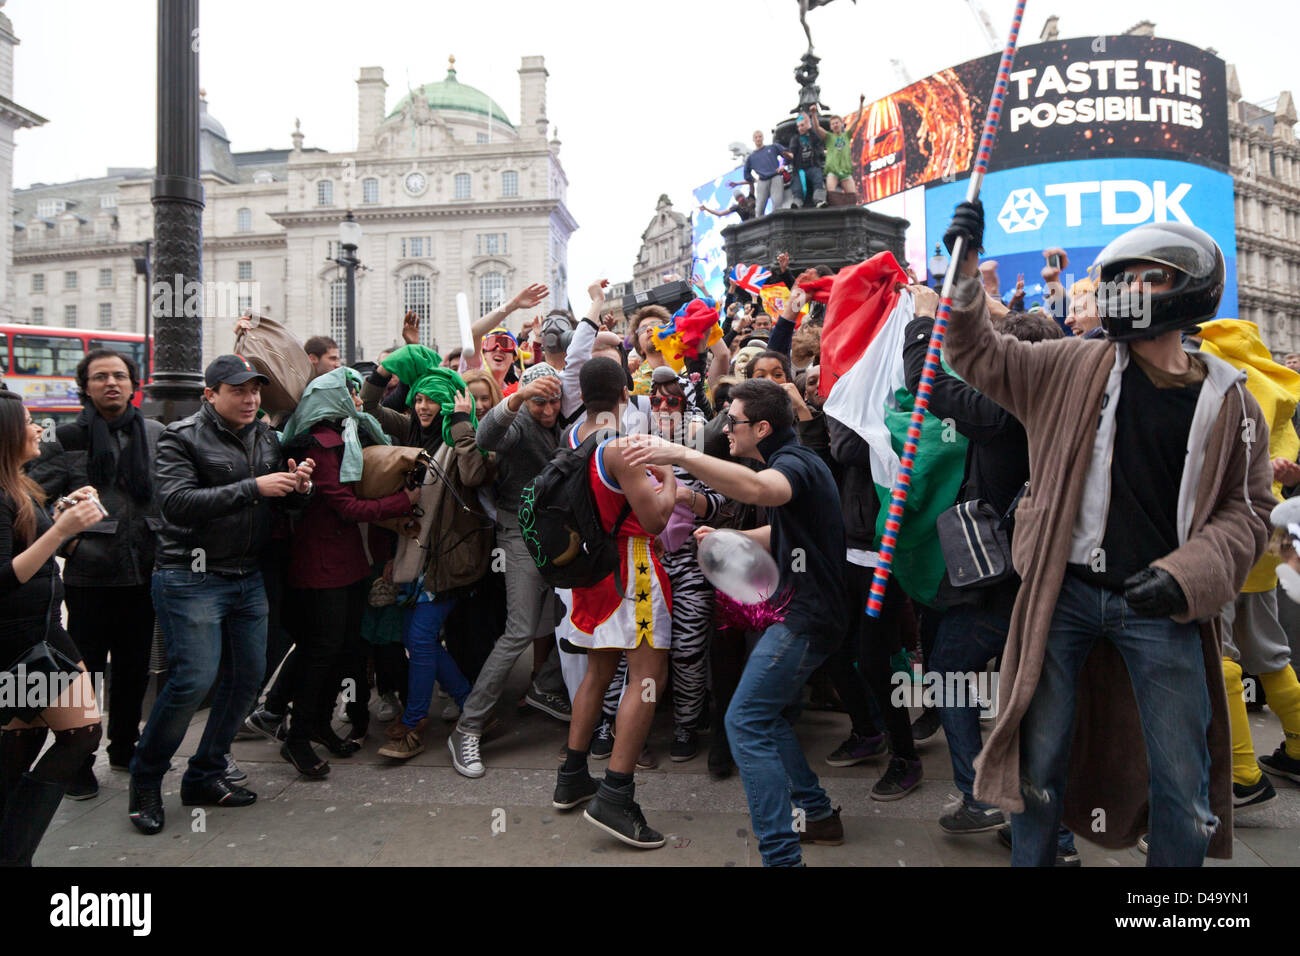 London, UK. 9th March, 2013. A large group of people gathered in Piccadilly to try and create London’s biggest Harlem Shake. The latest Internet craze involves a video of about 30 seconds with people dressed in various outfits dancing to a specific song. Stock Photo